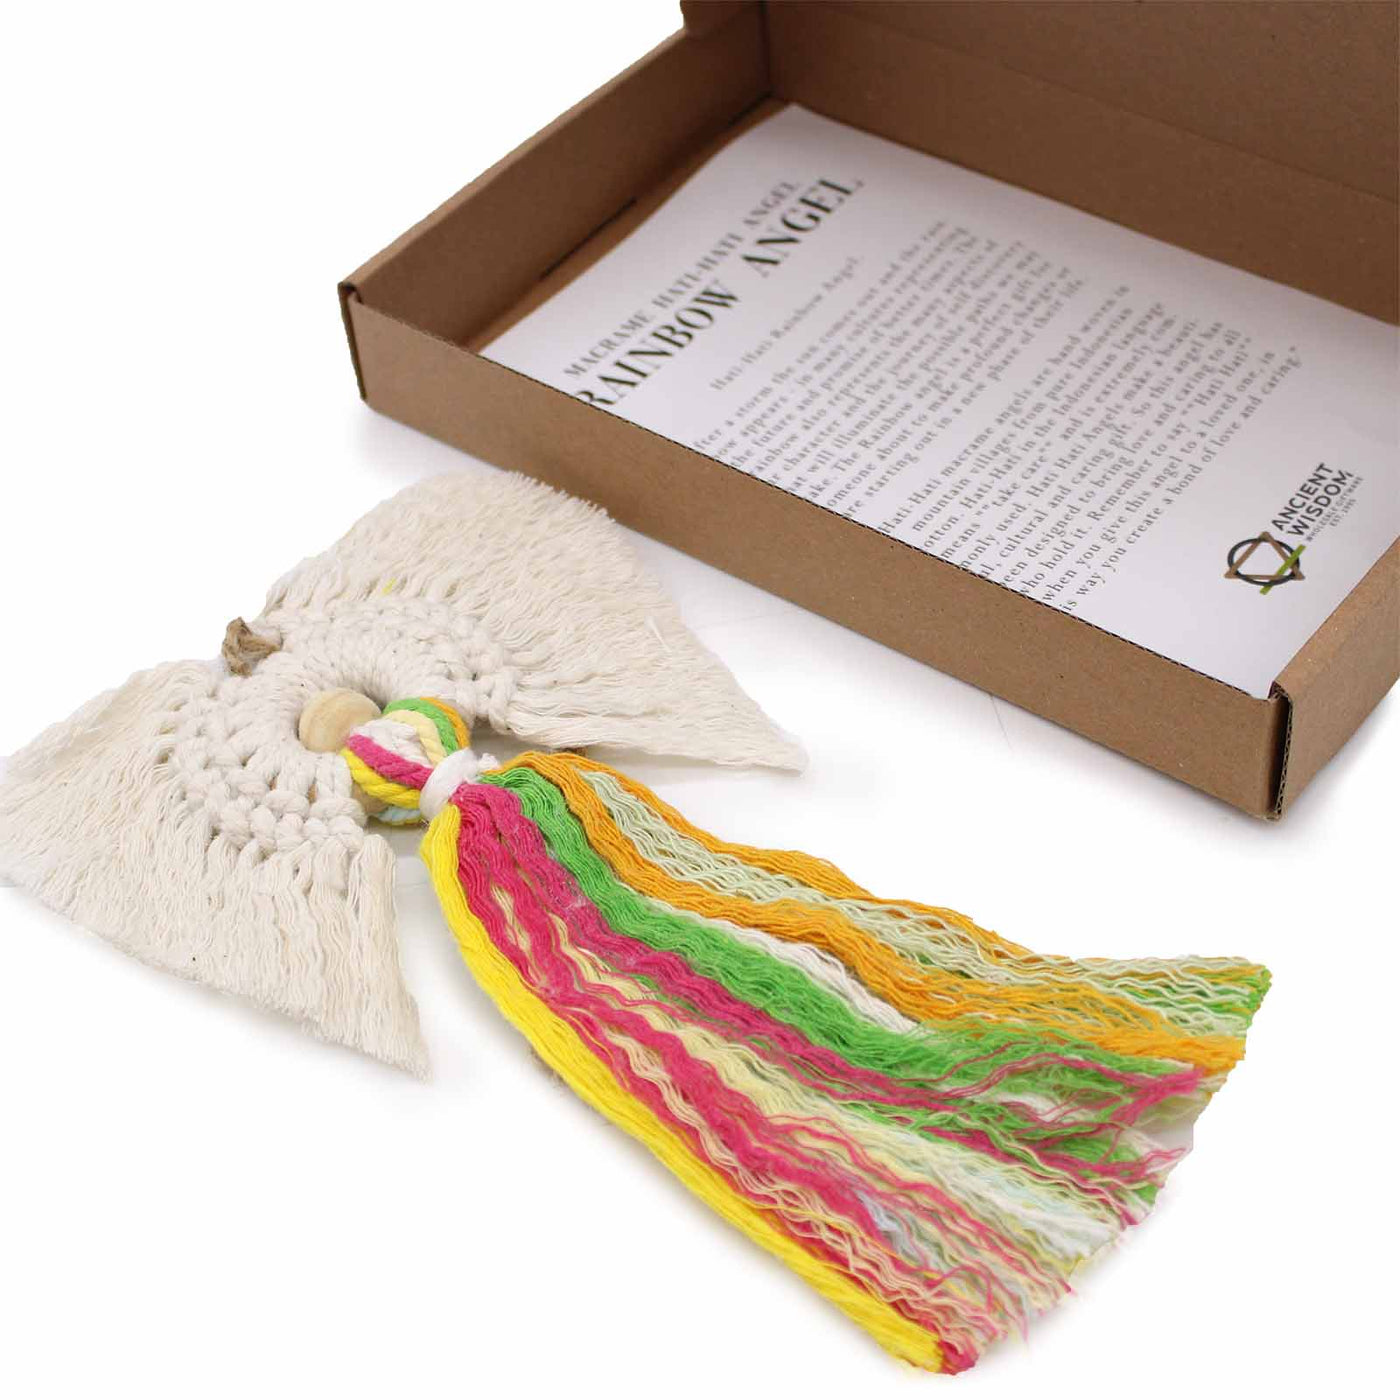 Hanging Colourful Cotton Macramé Angel in Gift Box - Harmony.